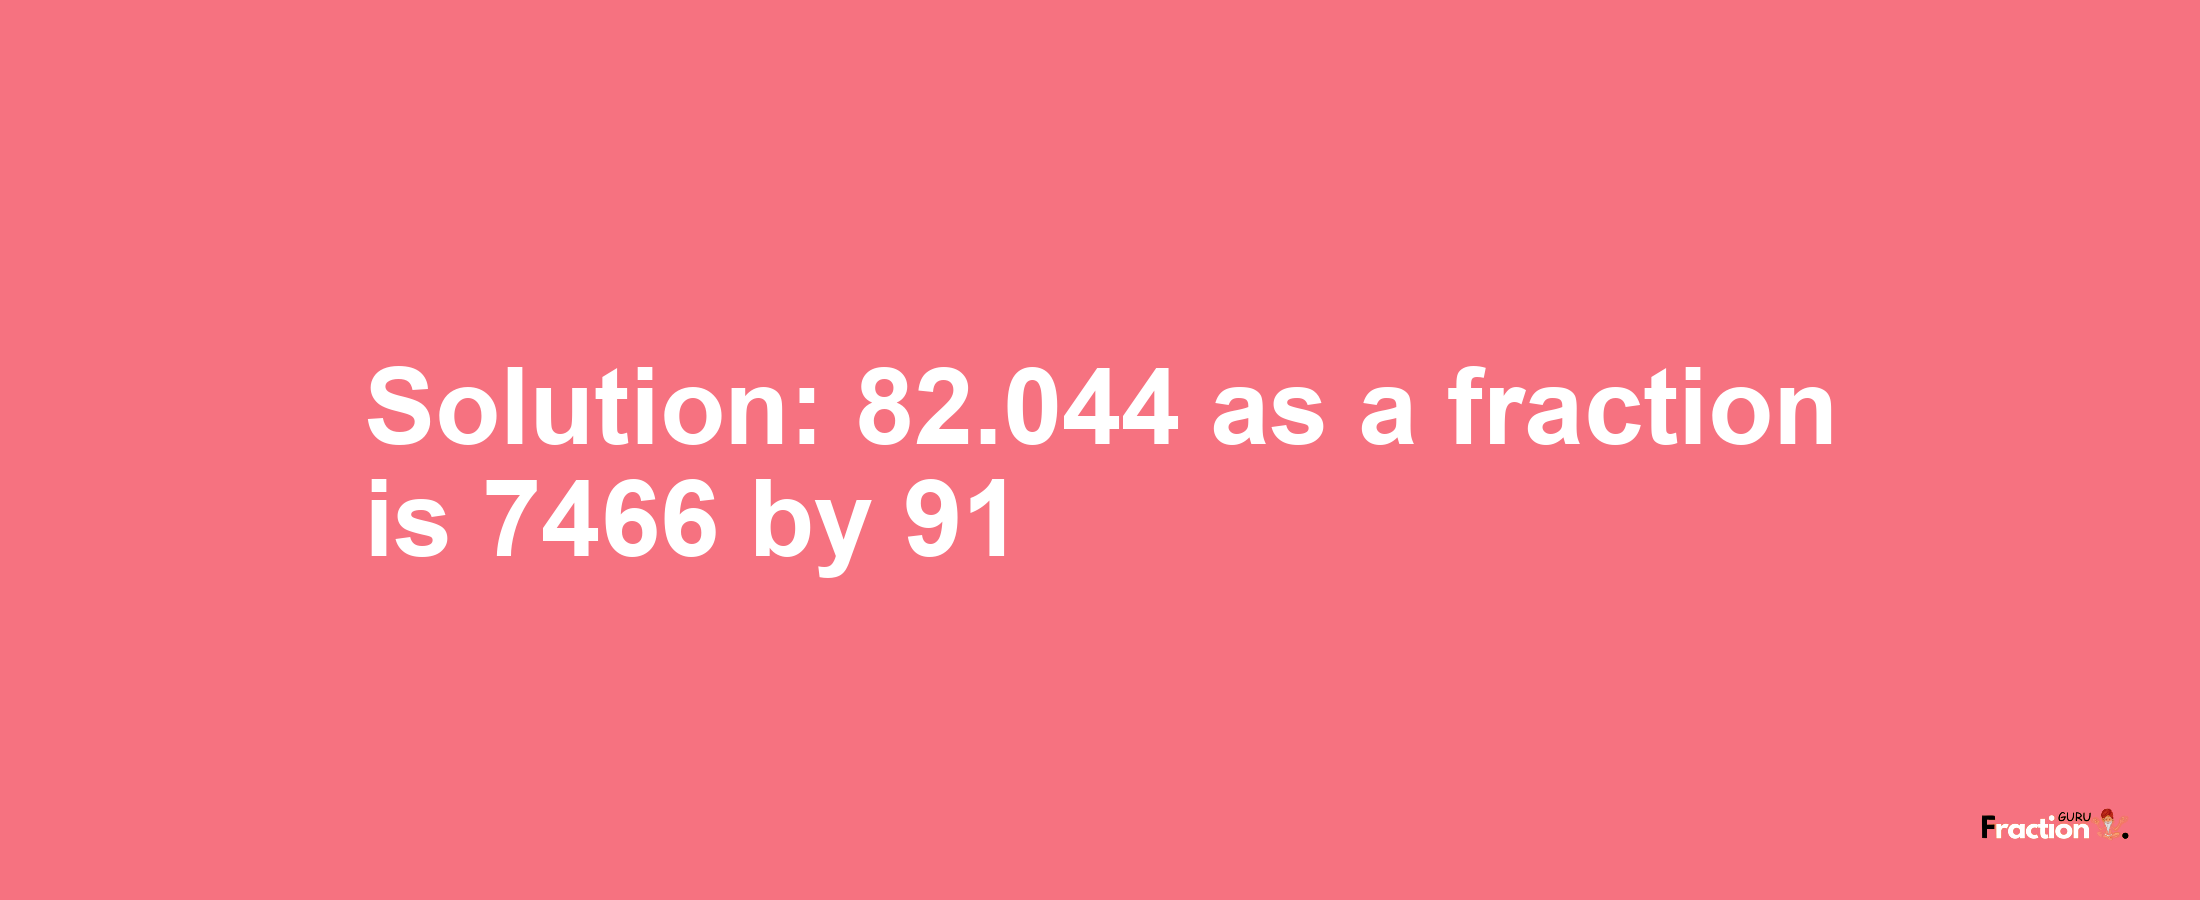 Solution:82.044 as a fraction is 7466/91